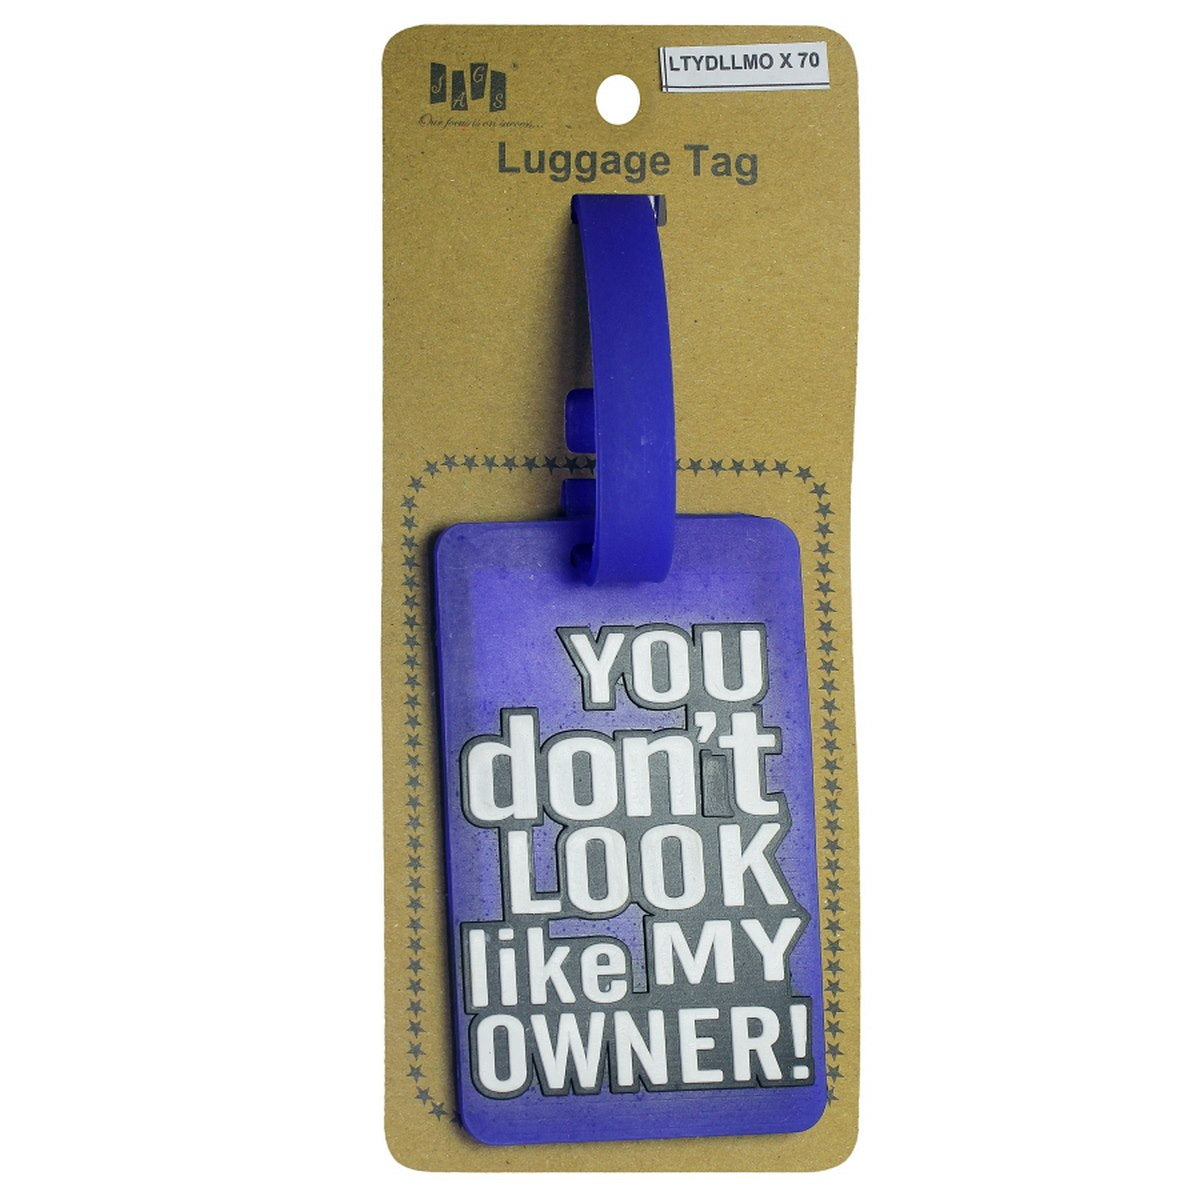 jags-mumbai Household Goods Luggage Tag Silicon You Don't Look Like My Owner LTYDLLMO